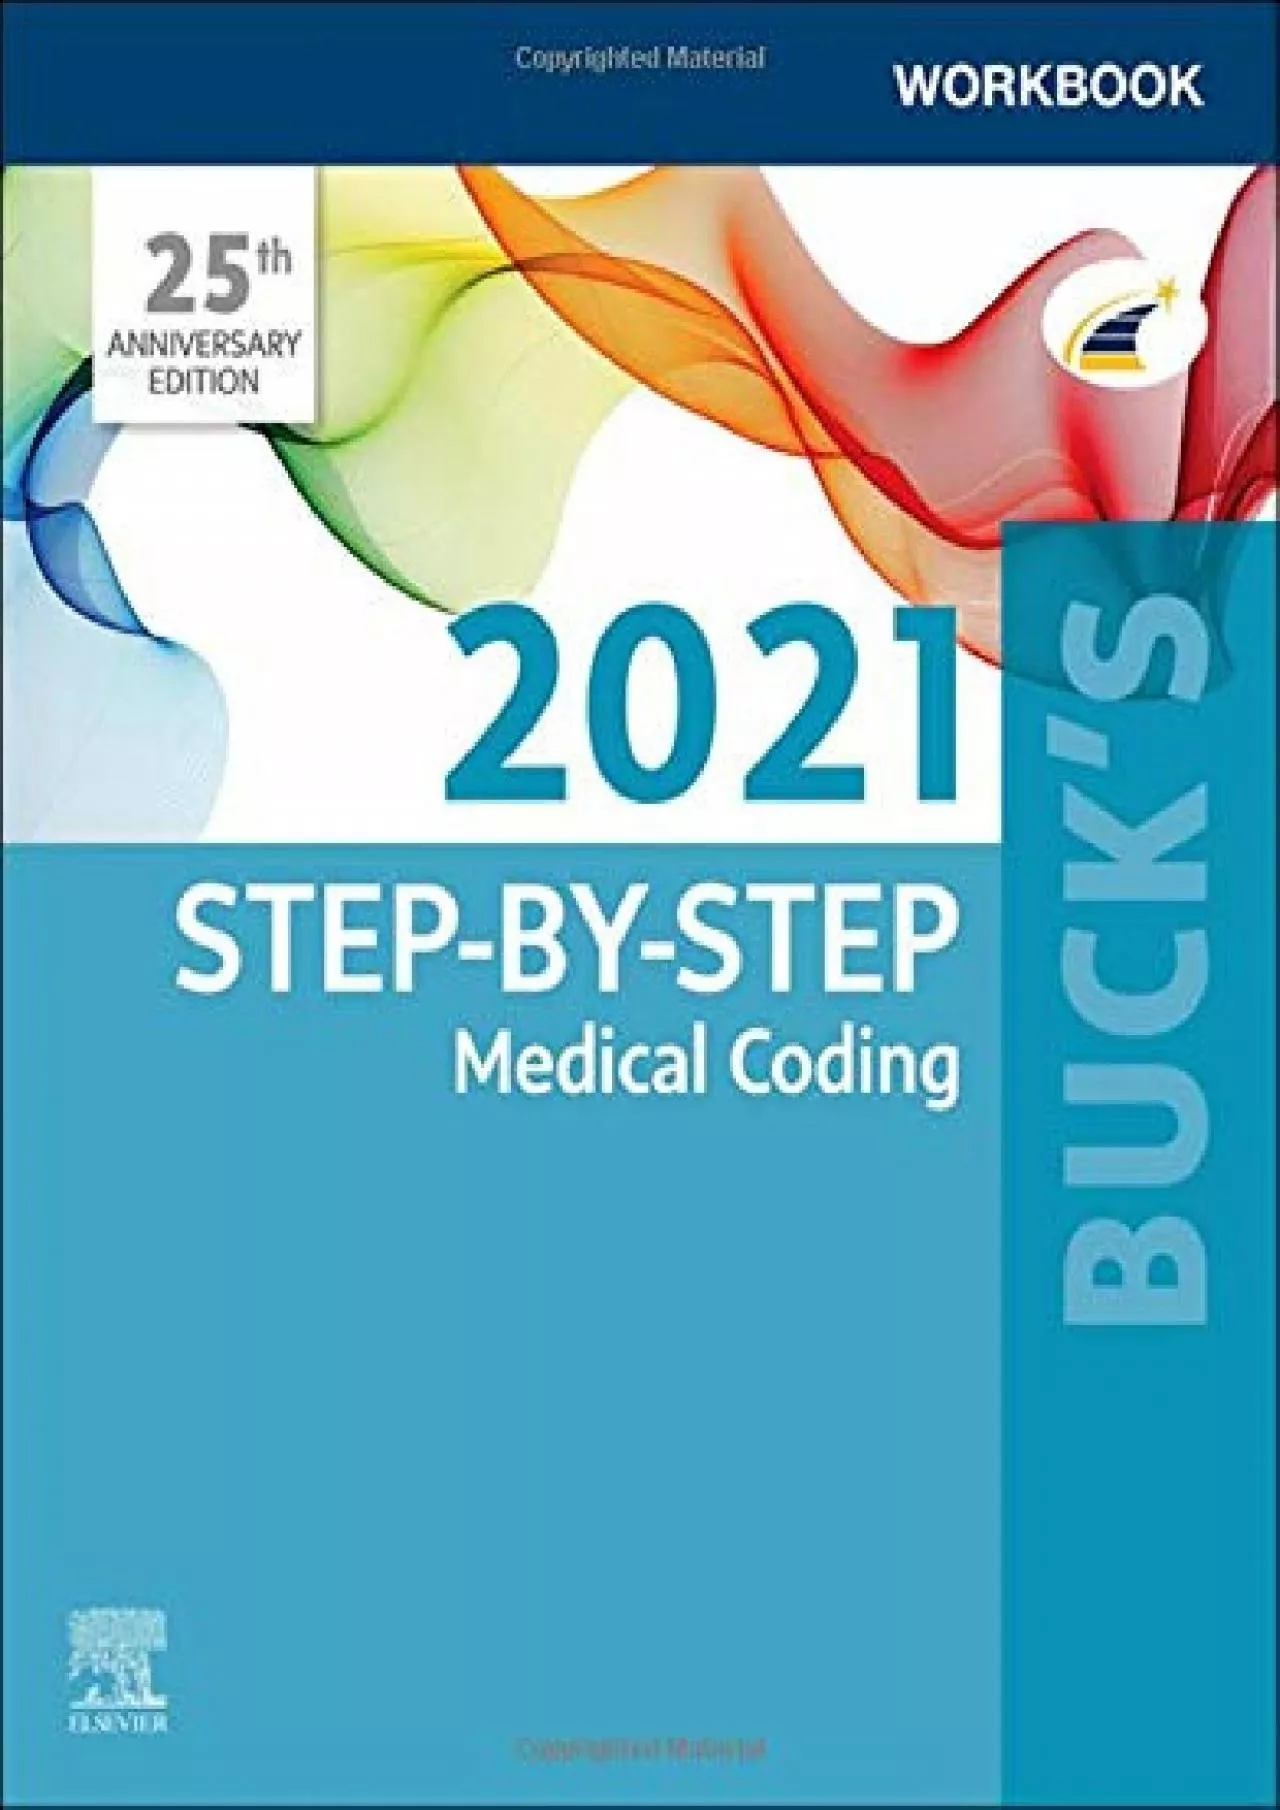 (EBOOK)-Buck\'s Workbook for Step-by-Step Medical Coding, 2021 Edition